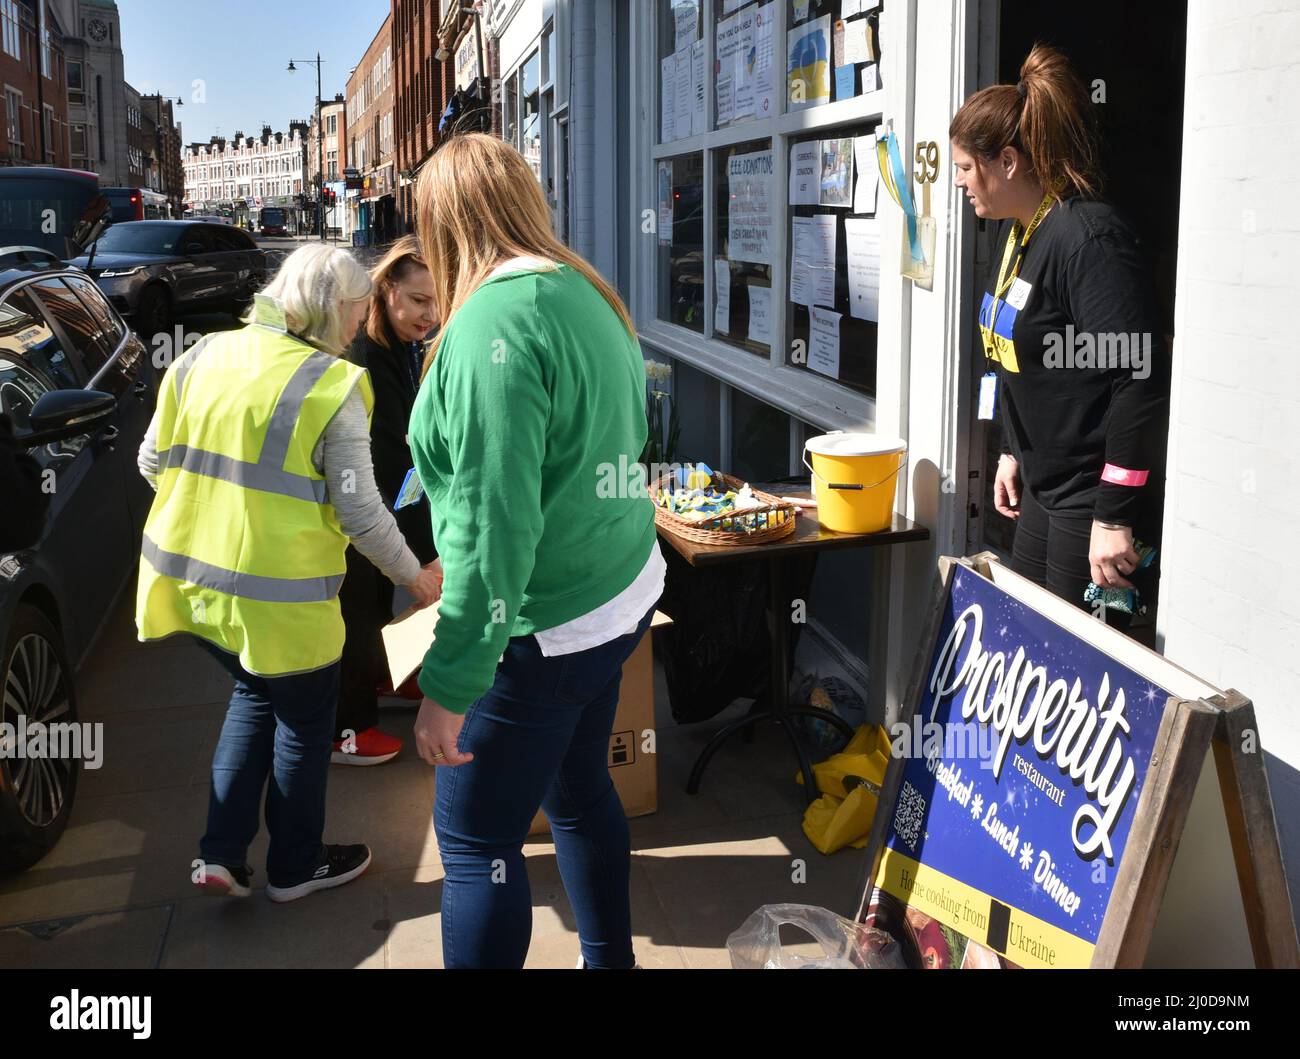 Twickenham, London, UK. 18th March 2022. The Prosperity Ukrainian Cafe & Restaurant is now a collection hub for humanitarian aid supplies that are being sorted, packed and transported by trucks to the Polish/Ukrainian border. Credit: Matthew Chattle/Alamy Stock Photo